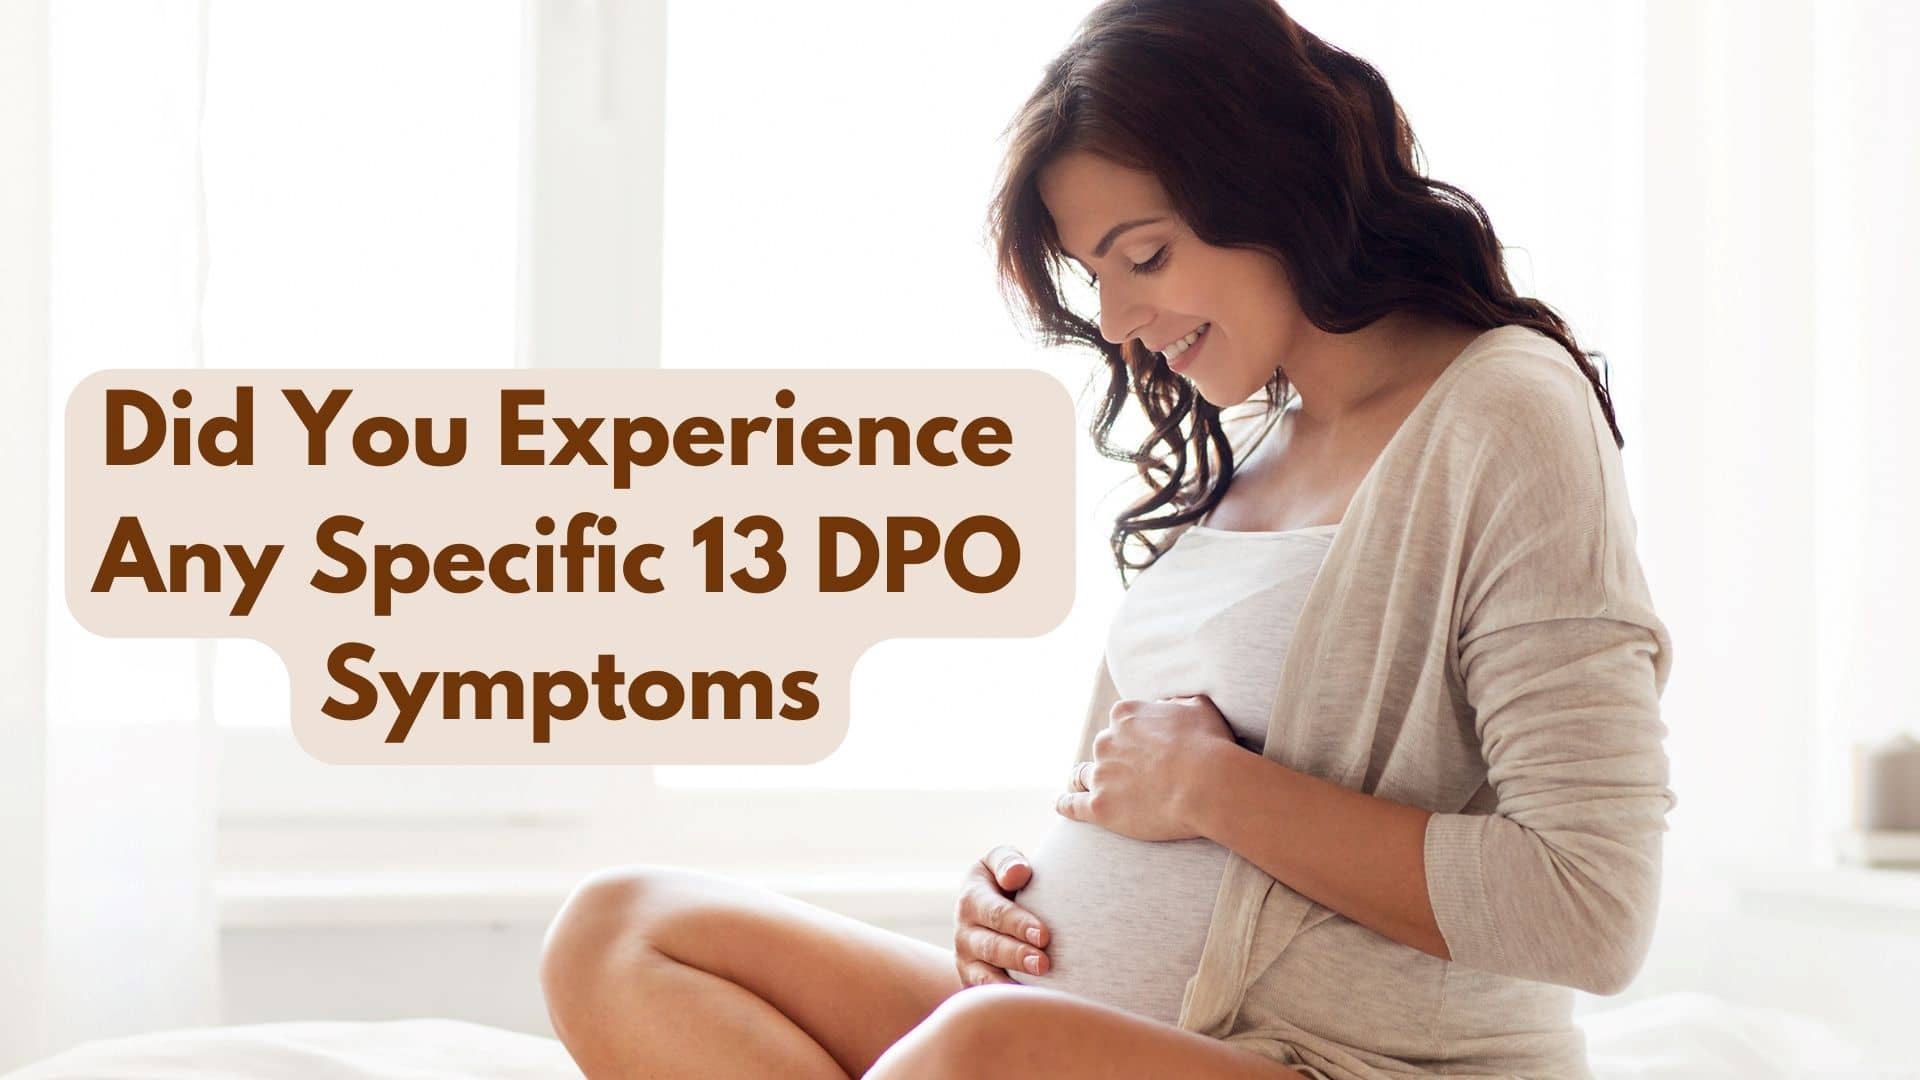 Did You Experience Any Specific 13 DPO Symptoms